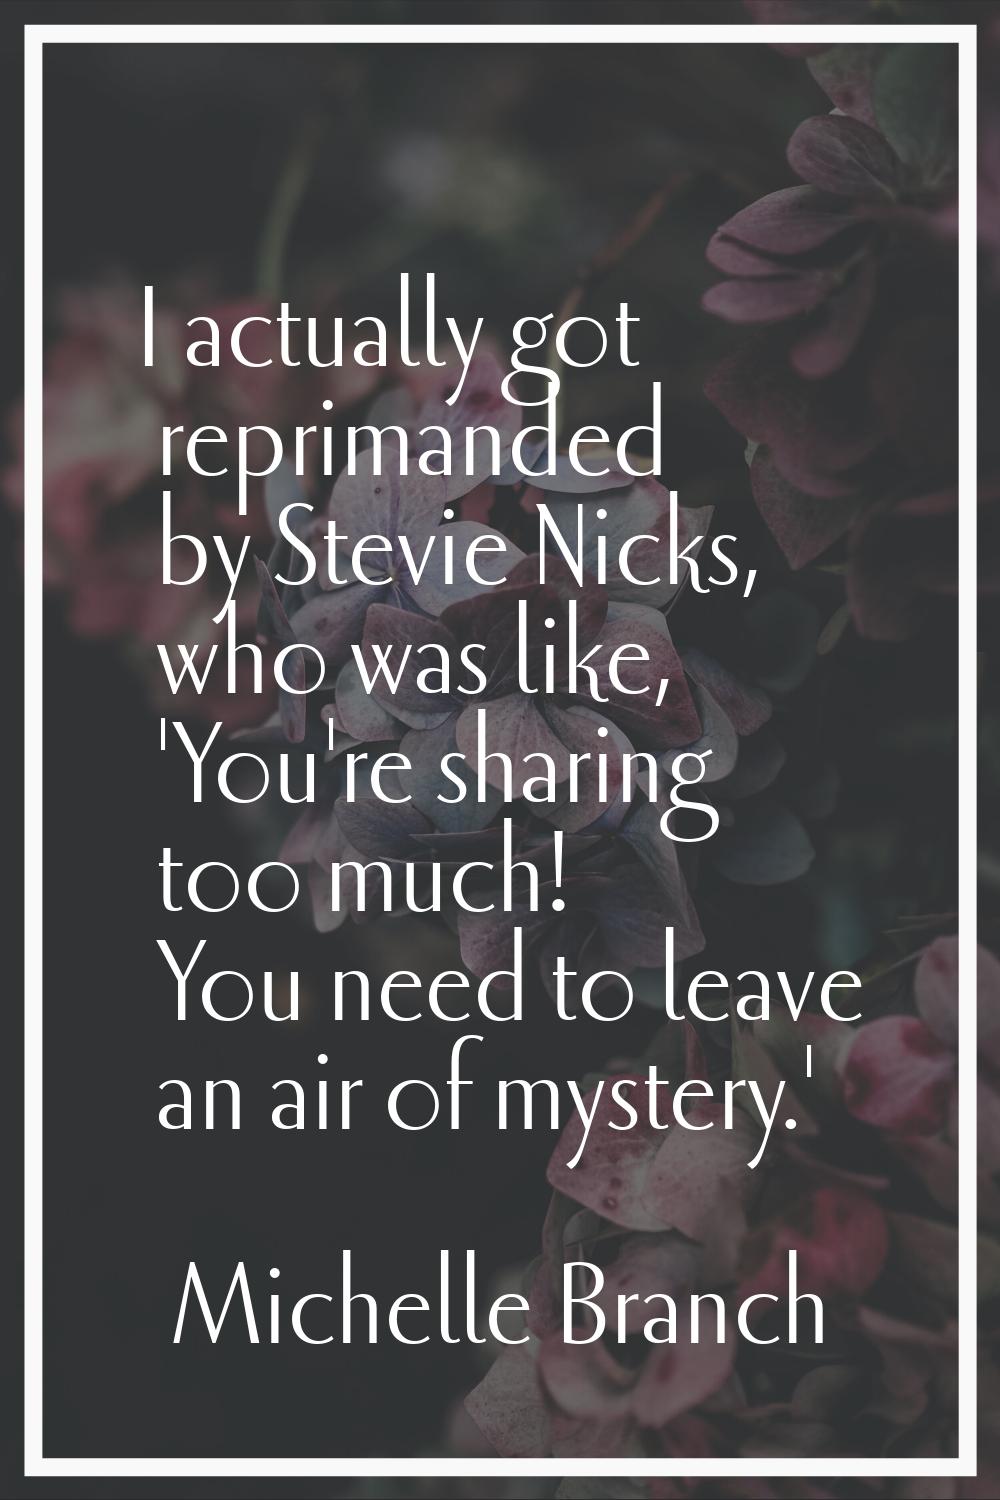 I actually got reprimanded by Stevie Nicks, who was like, 'You're sharing too much! You need to lea